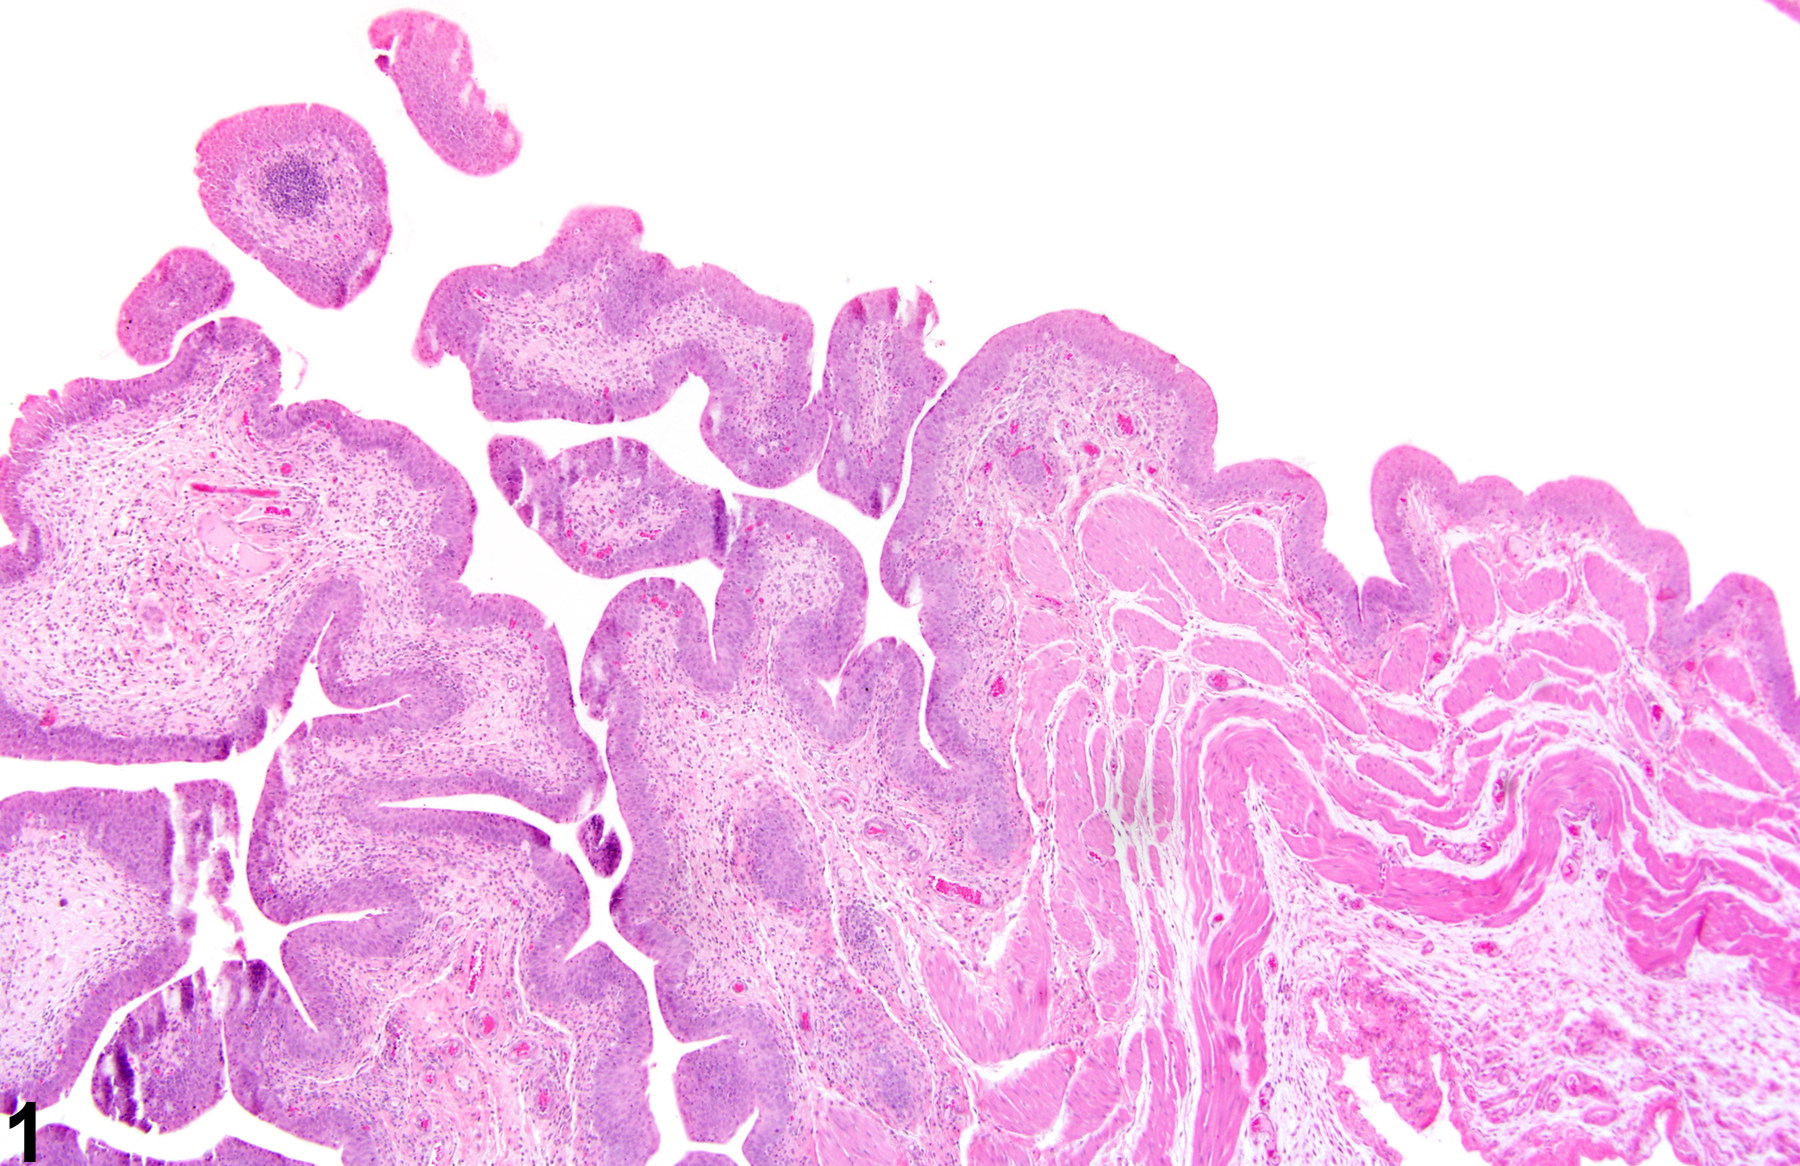 Image of hyperplasia in the urinary bladder from a male F344/N rat in a chronic study